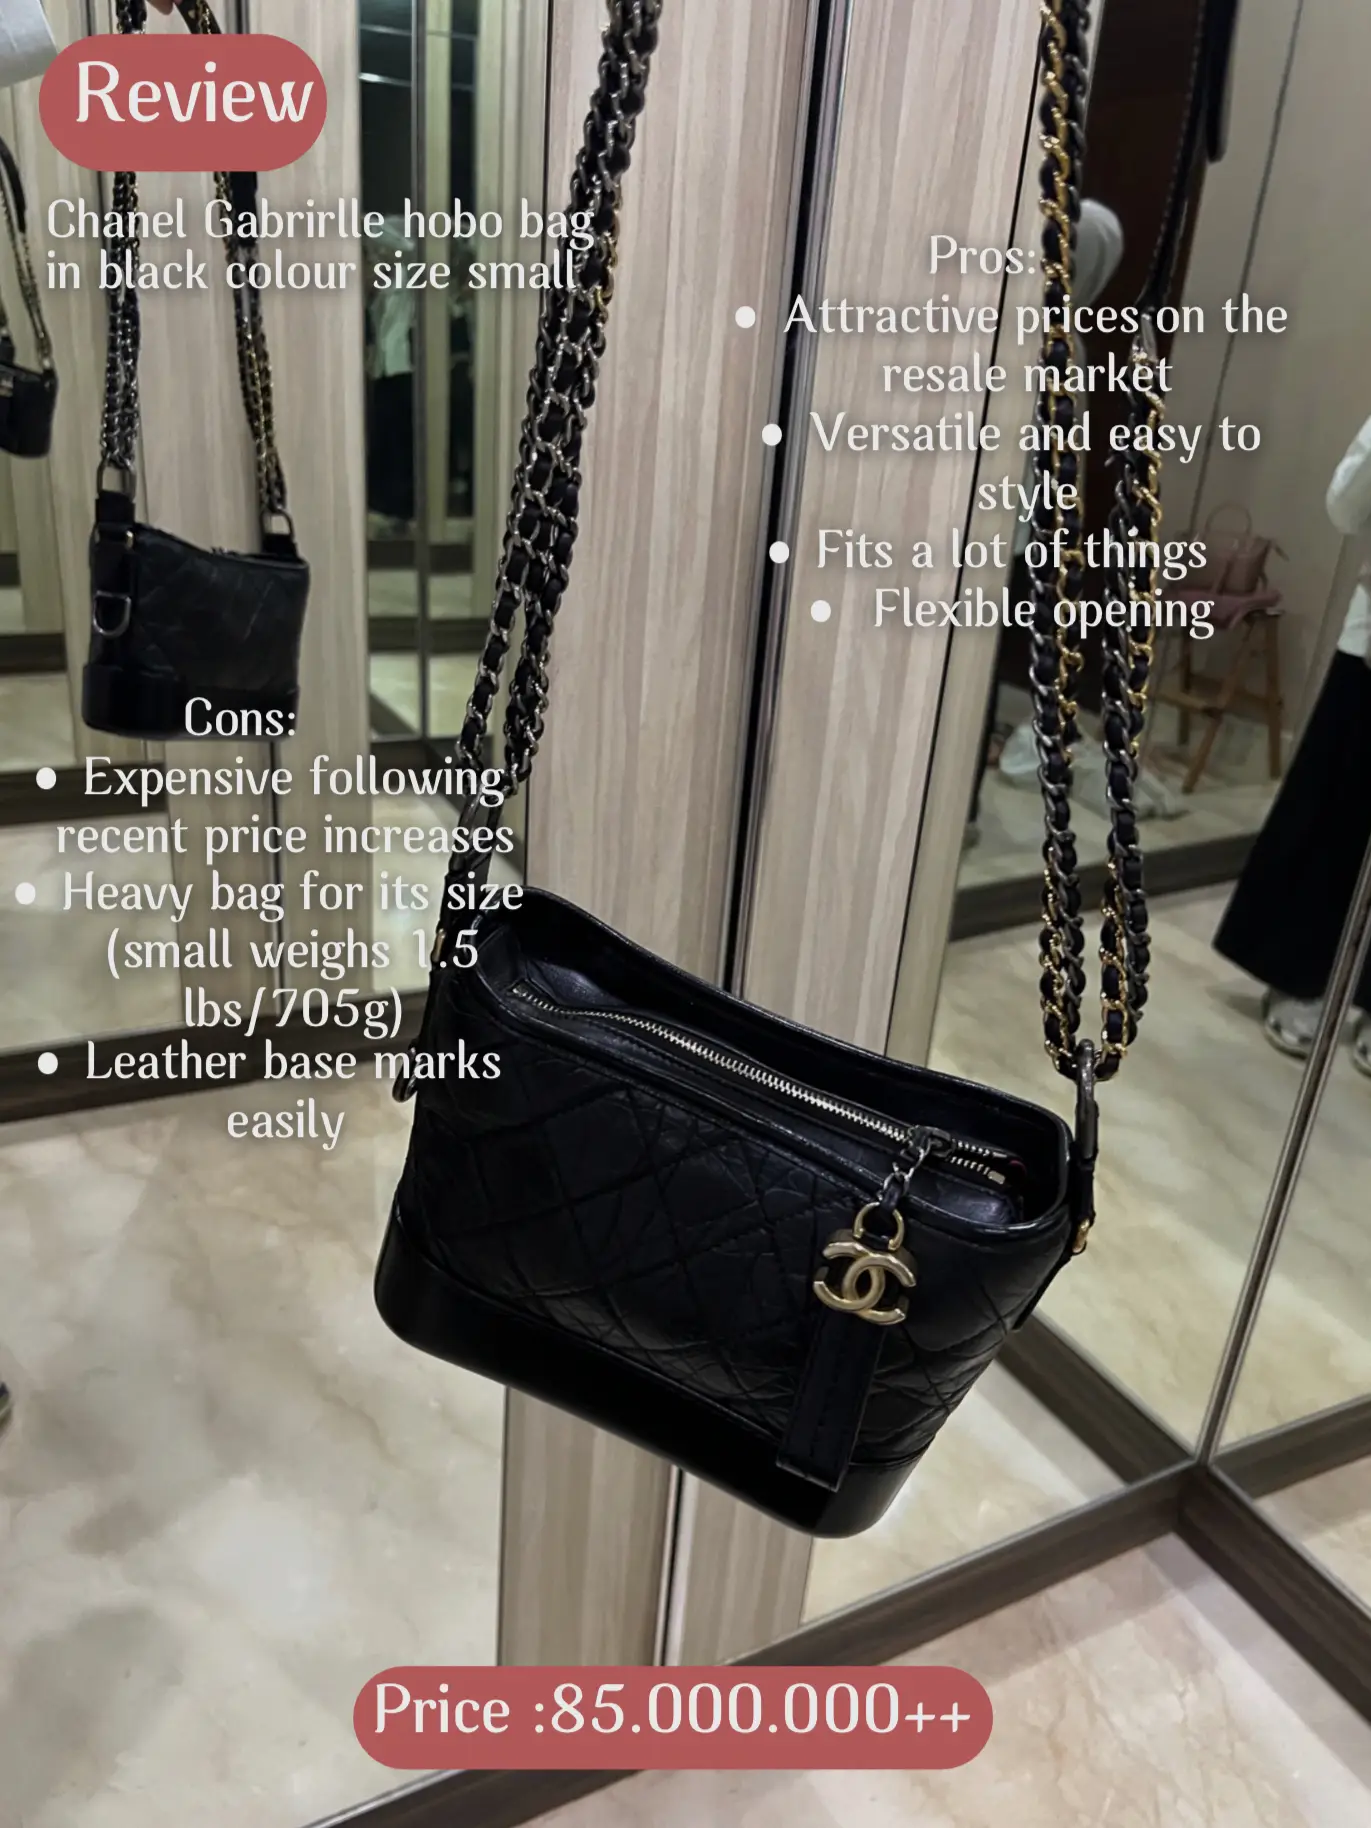 Chanel Business Affinity Bag Review & What Fits & Pros and Cons 